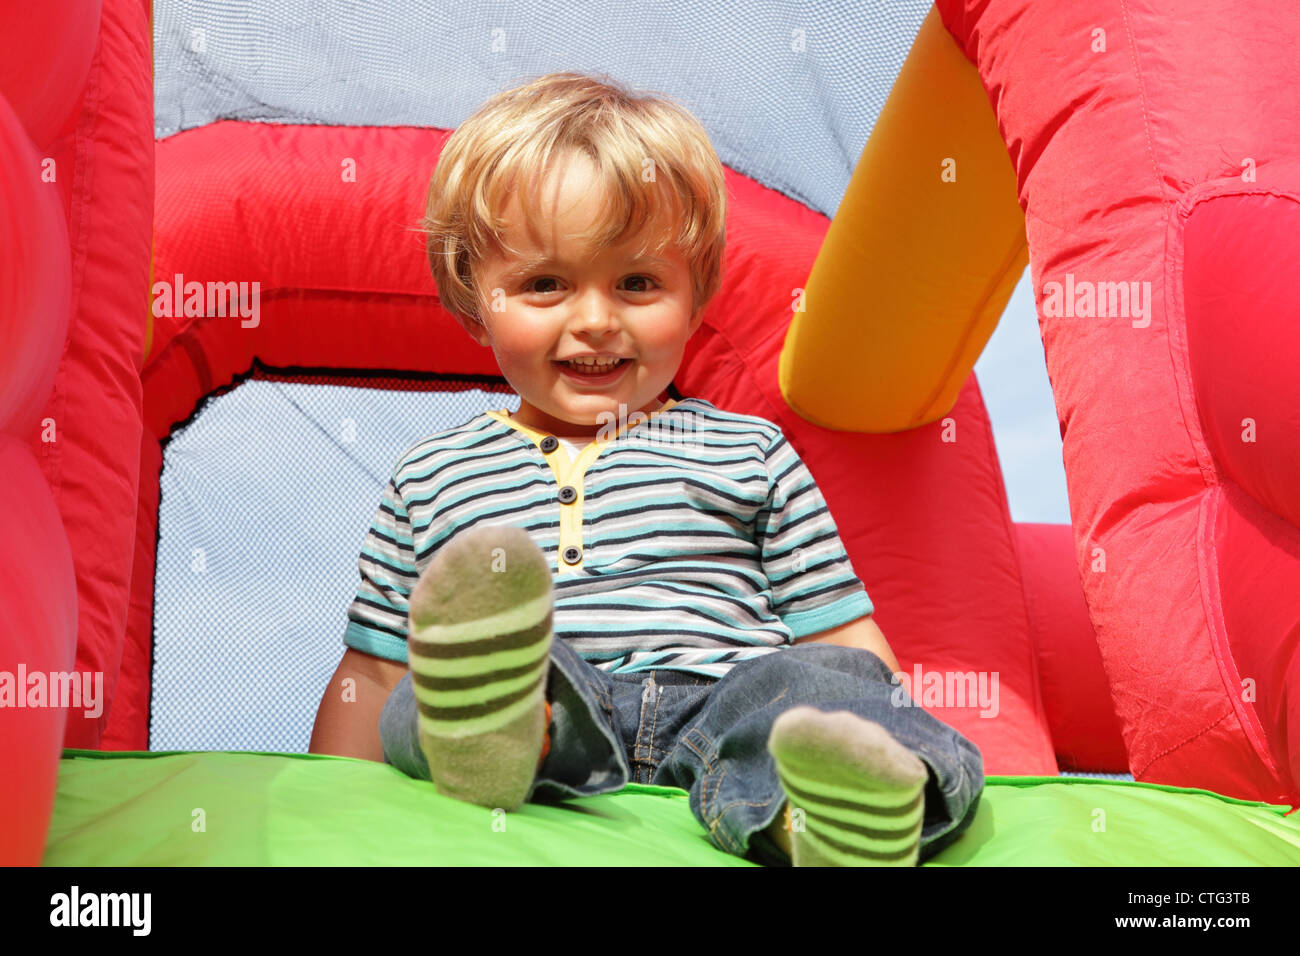 Child on inflatable bouncy castle Stock Photo